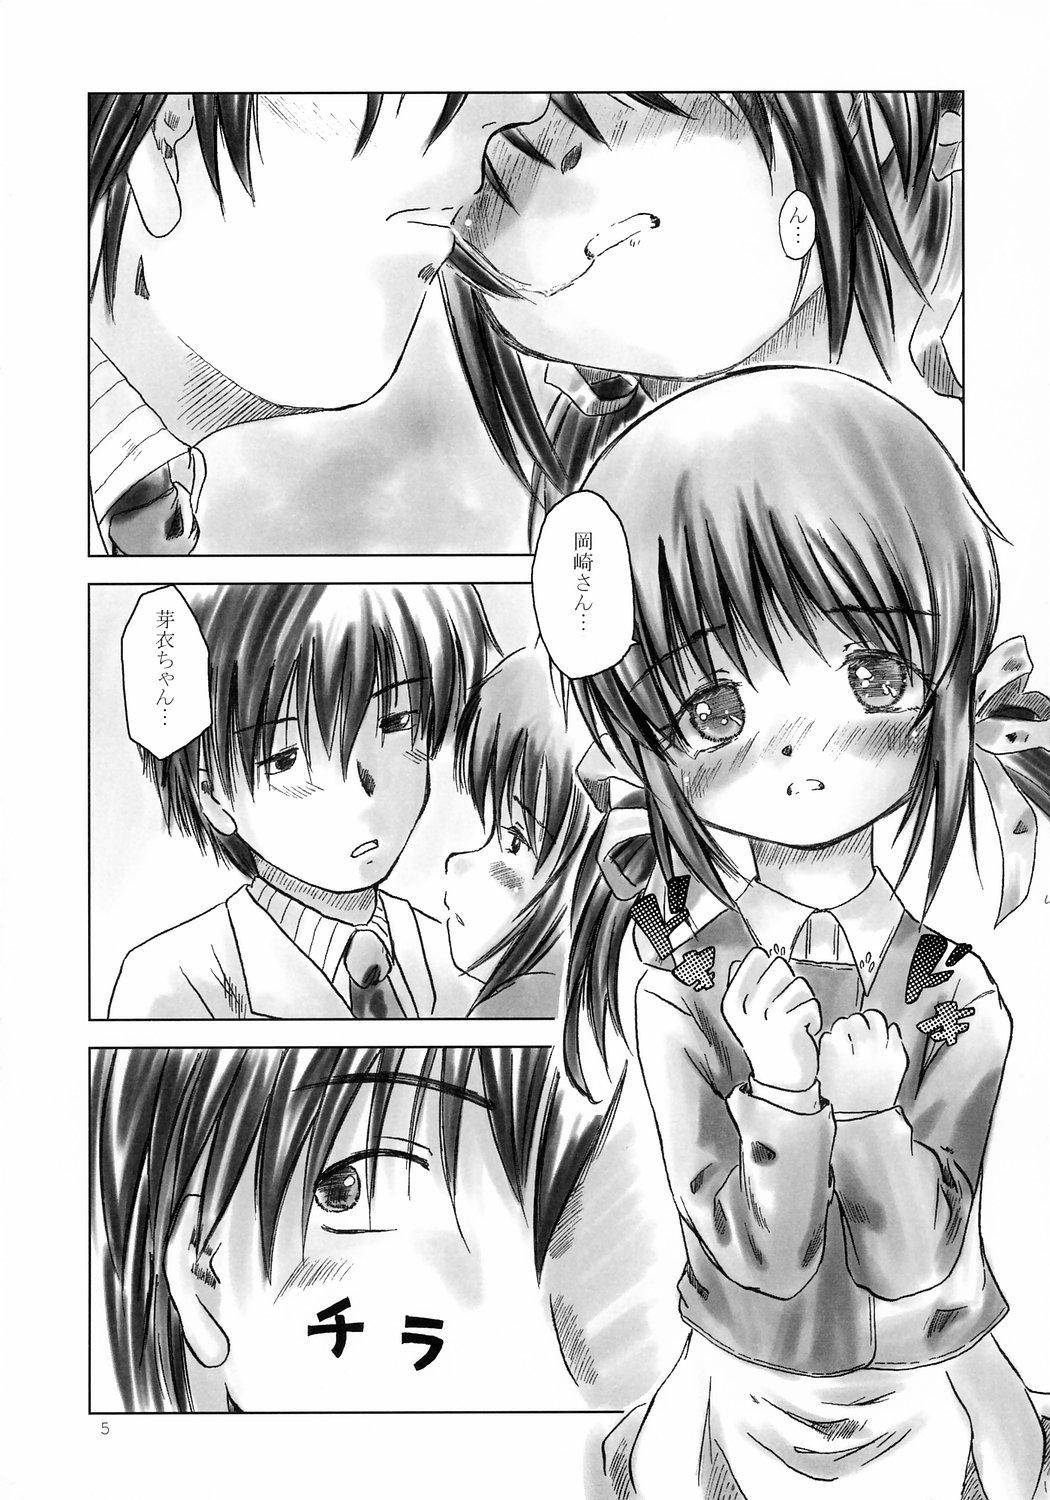 Erotic May it be!! - Clannad Underwear - Page 4